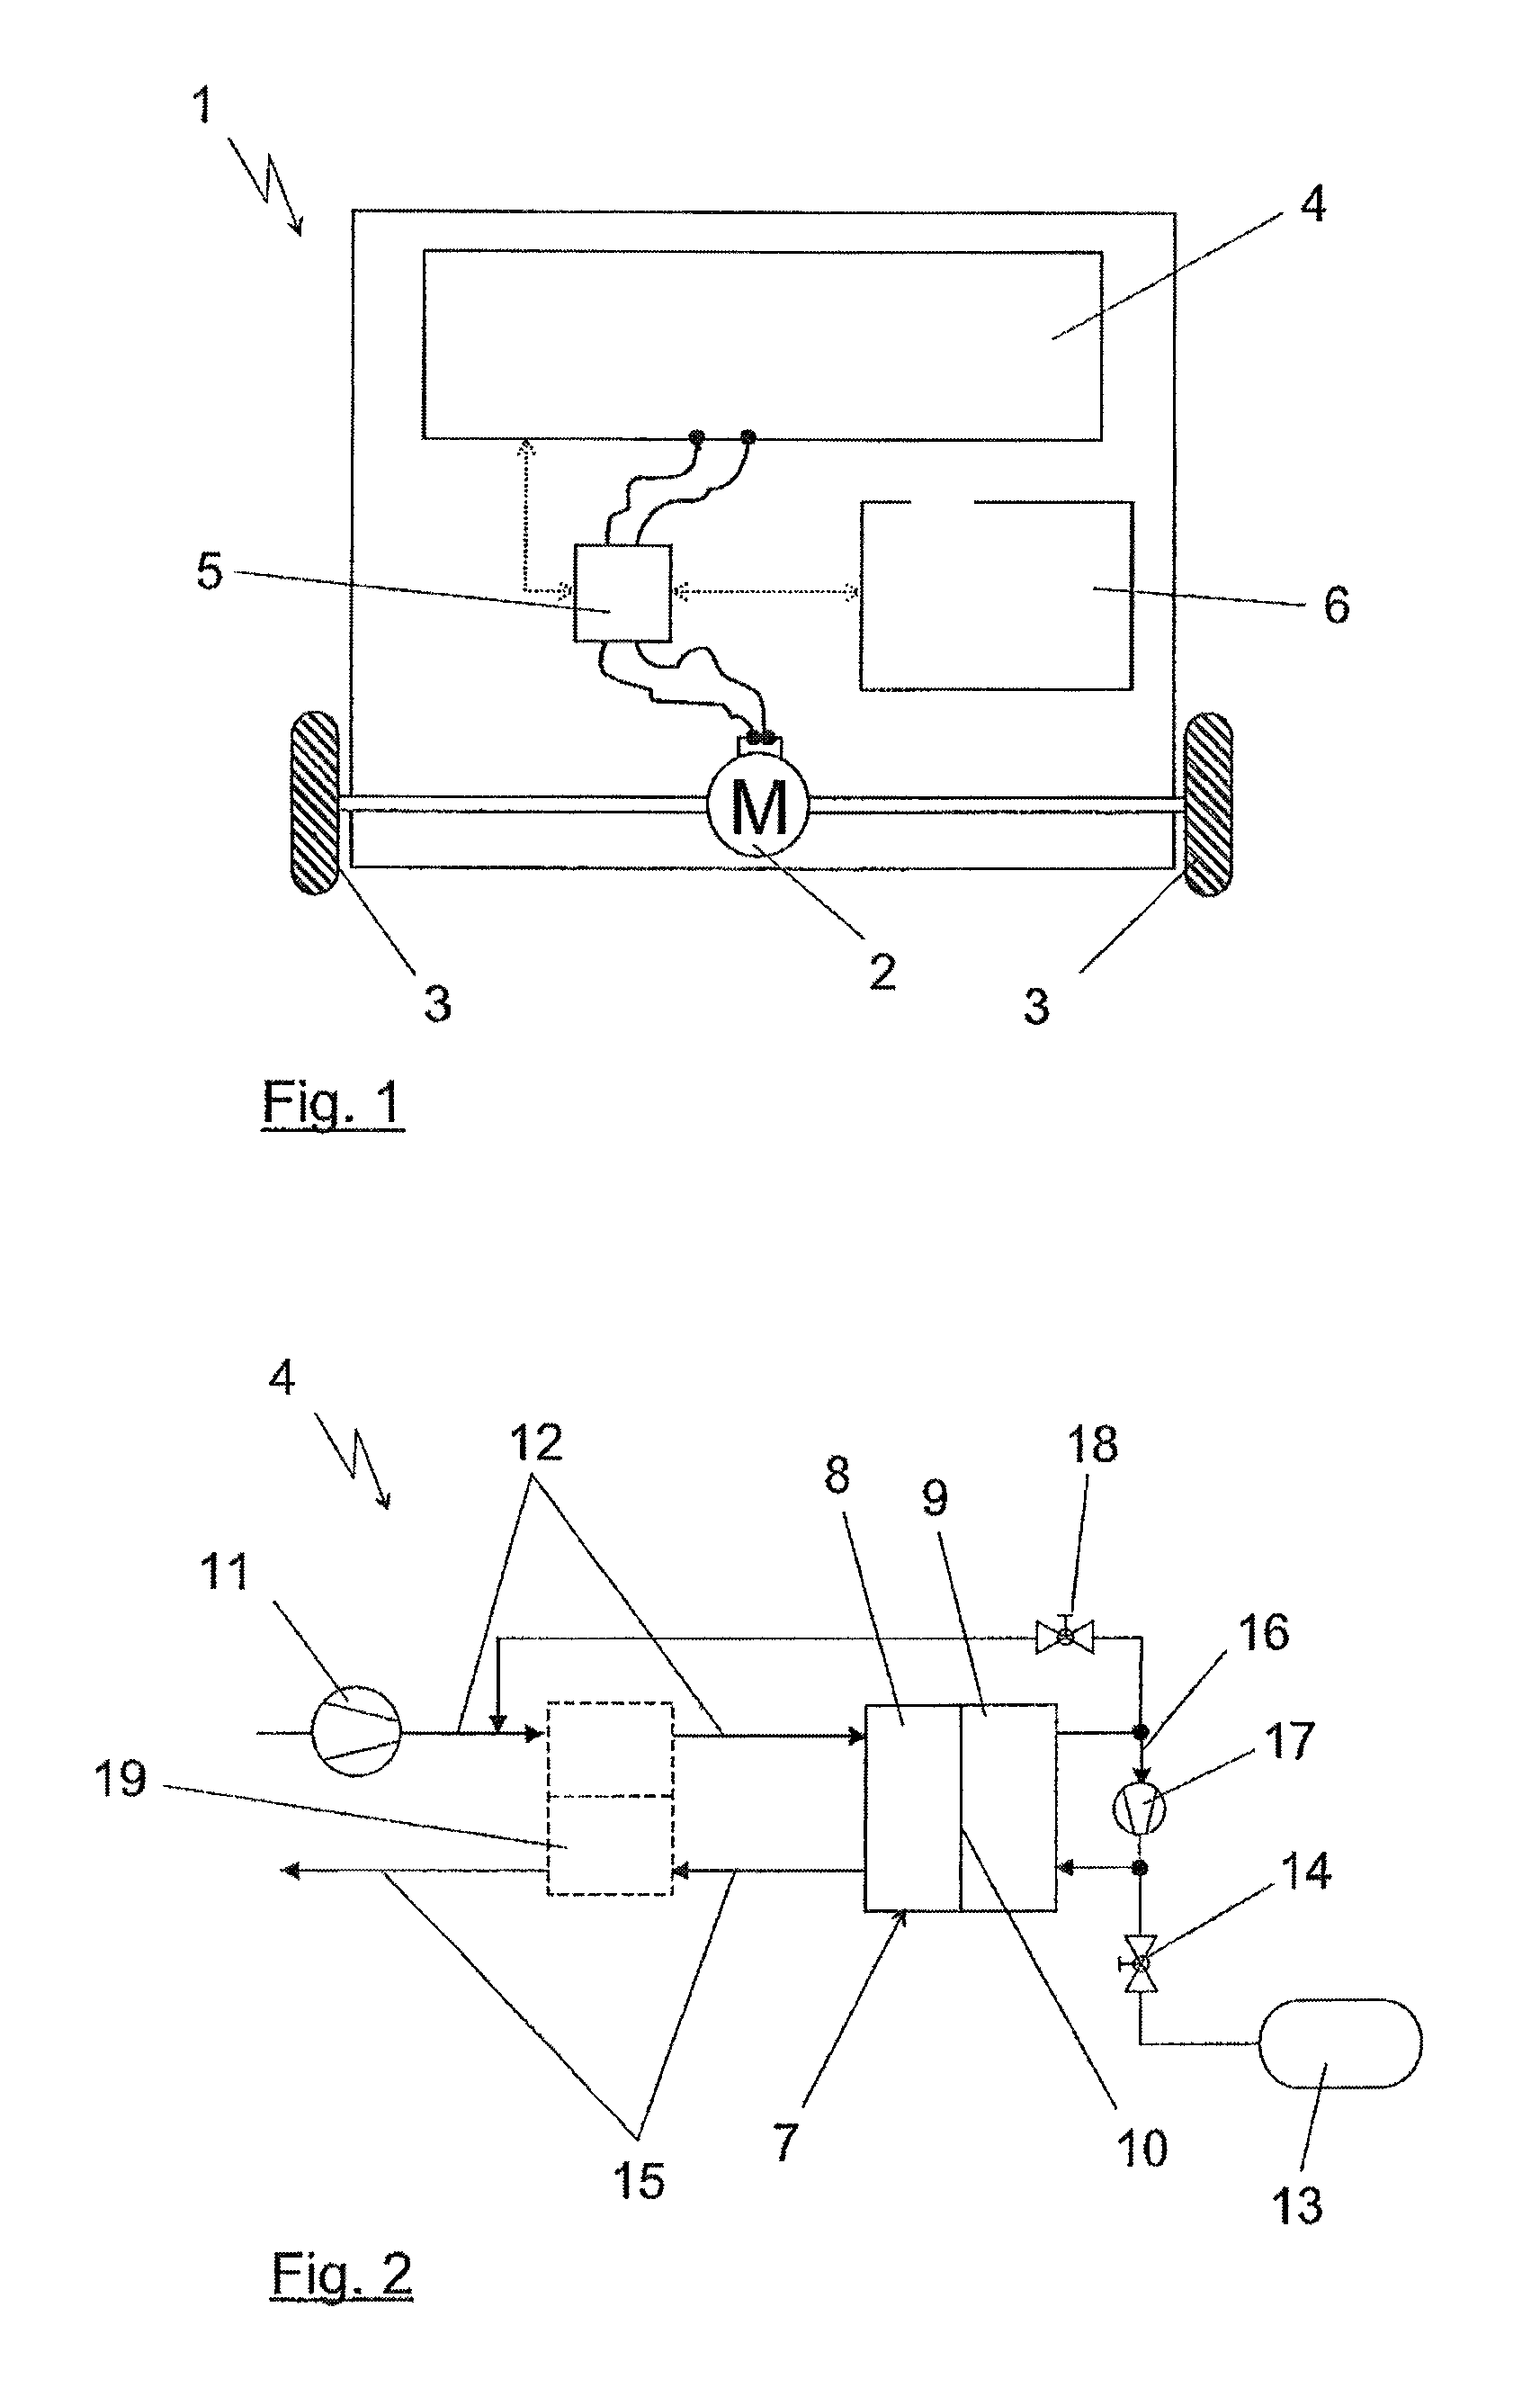 Method for operation of a fuel cell system in a vehicle